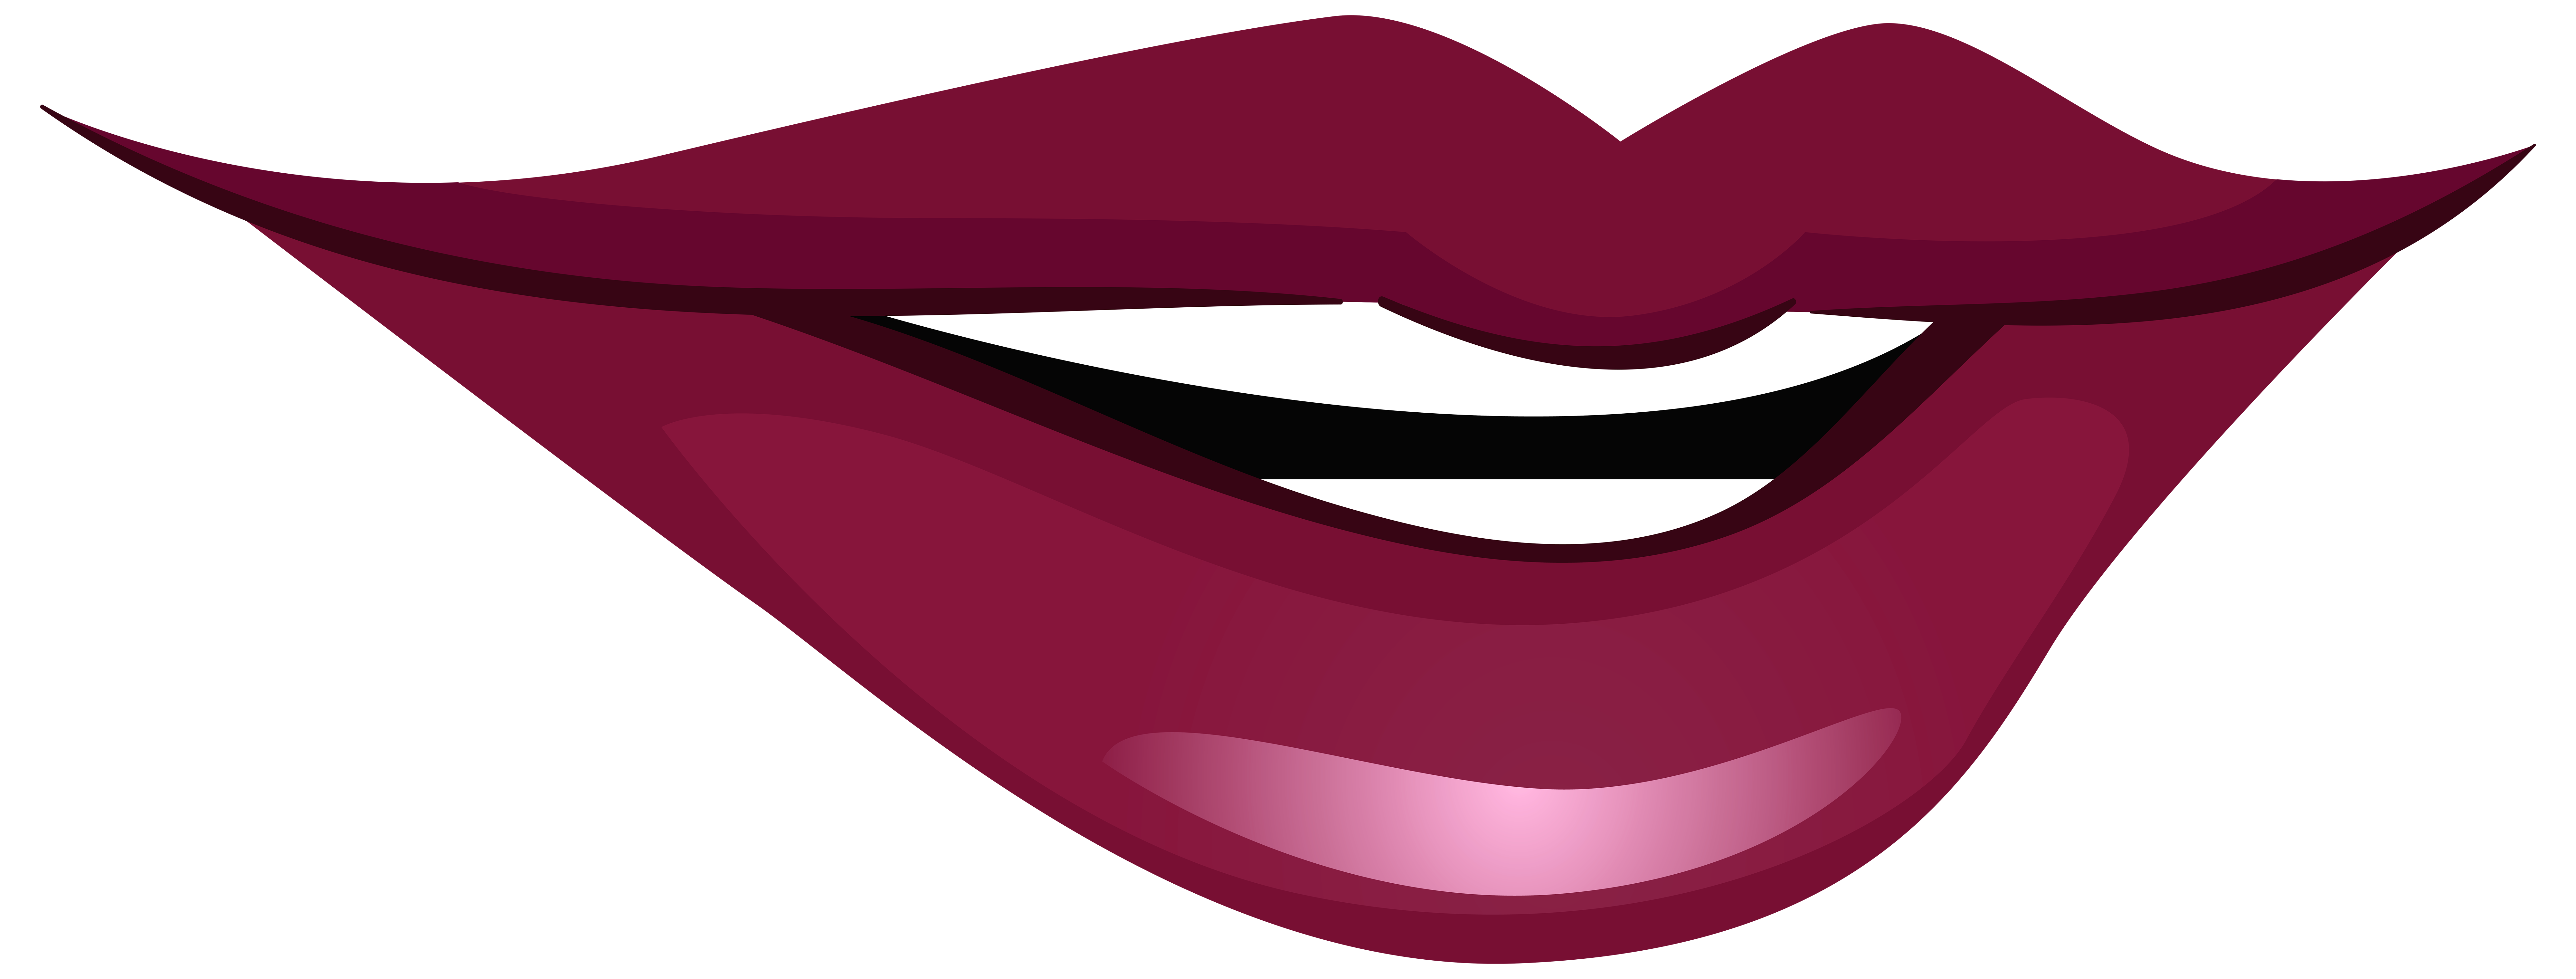 mouth clipart photo booth lip